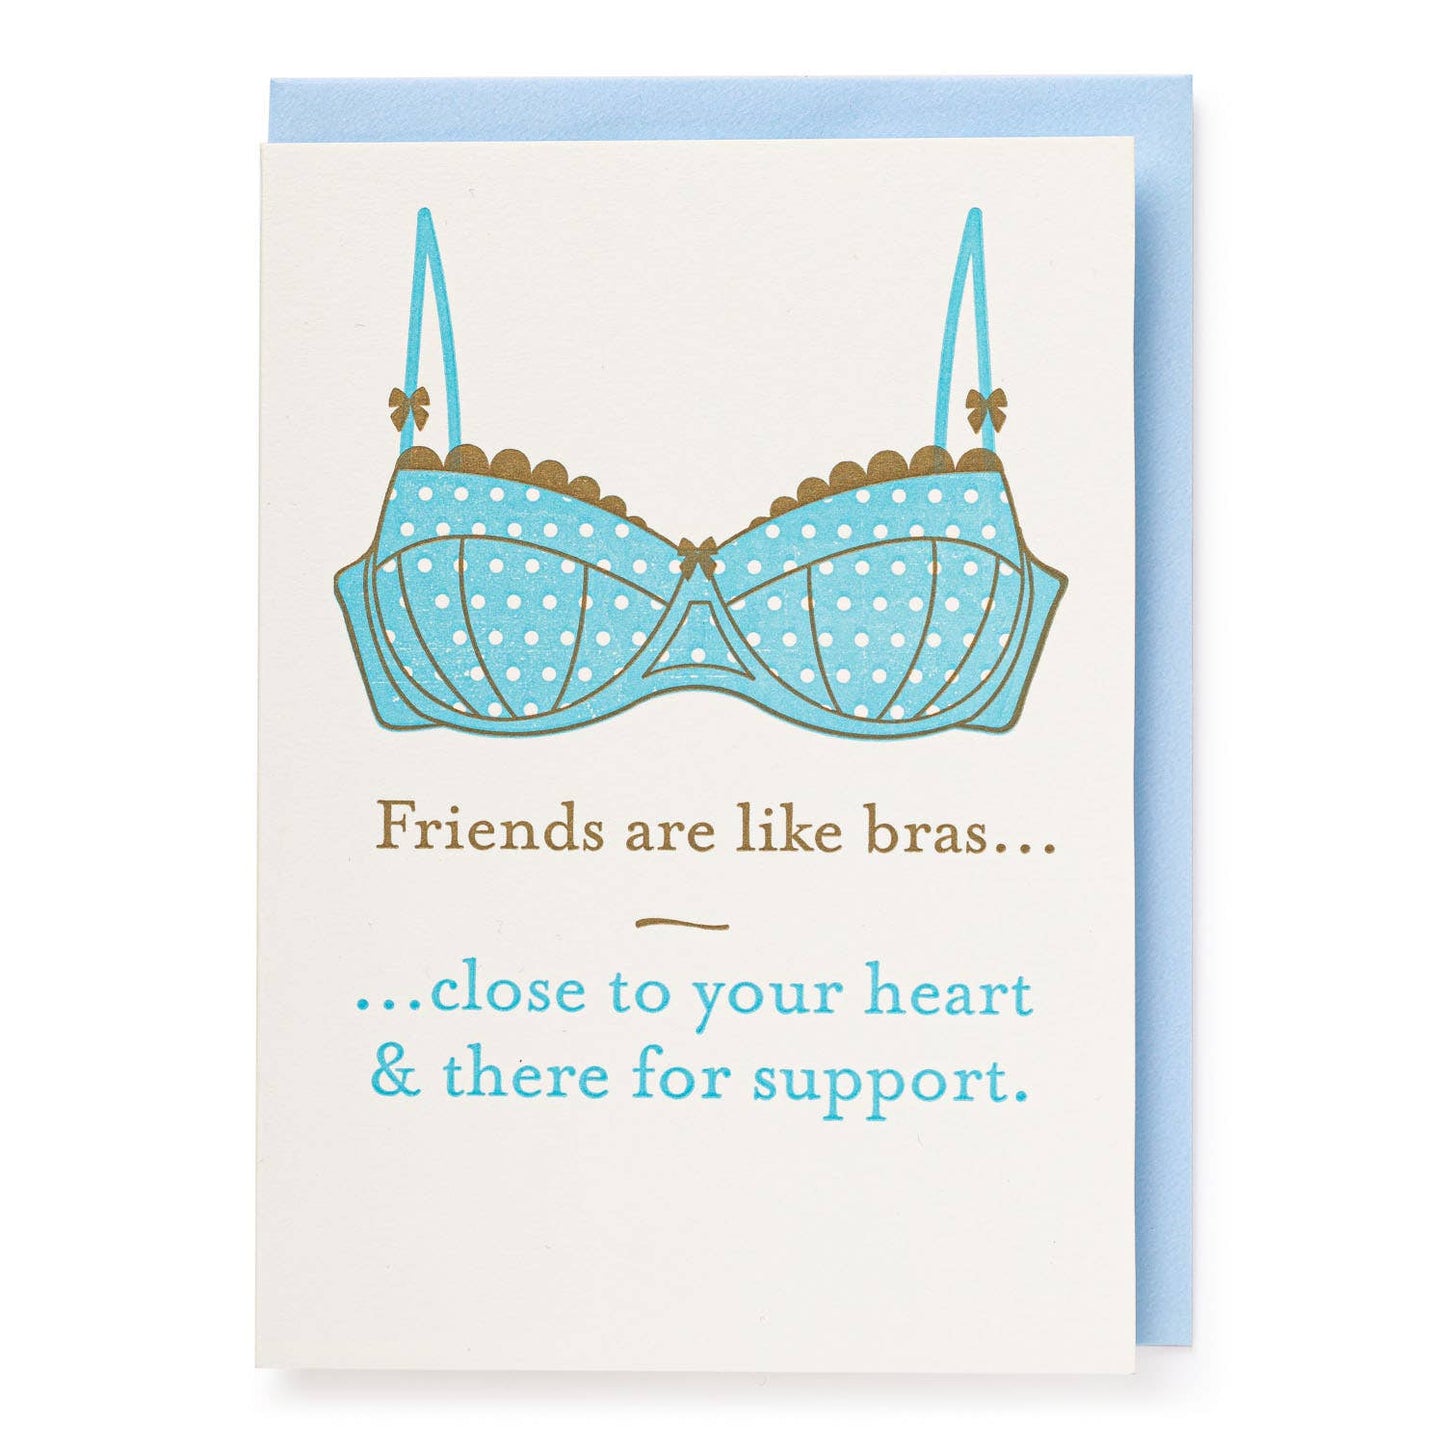 Friends are like bras Greeting Card